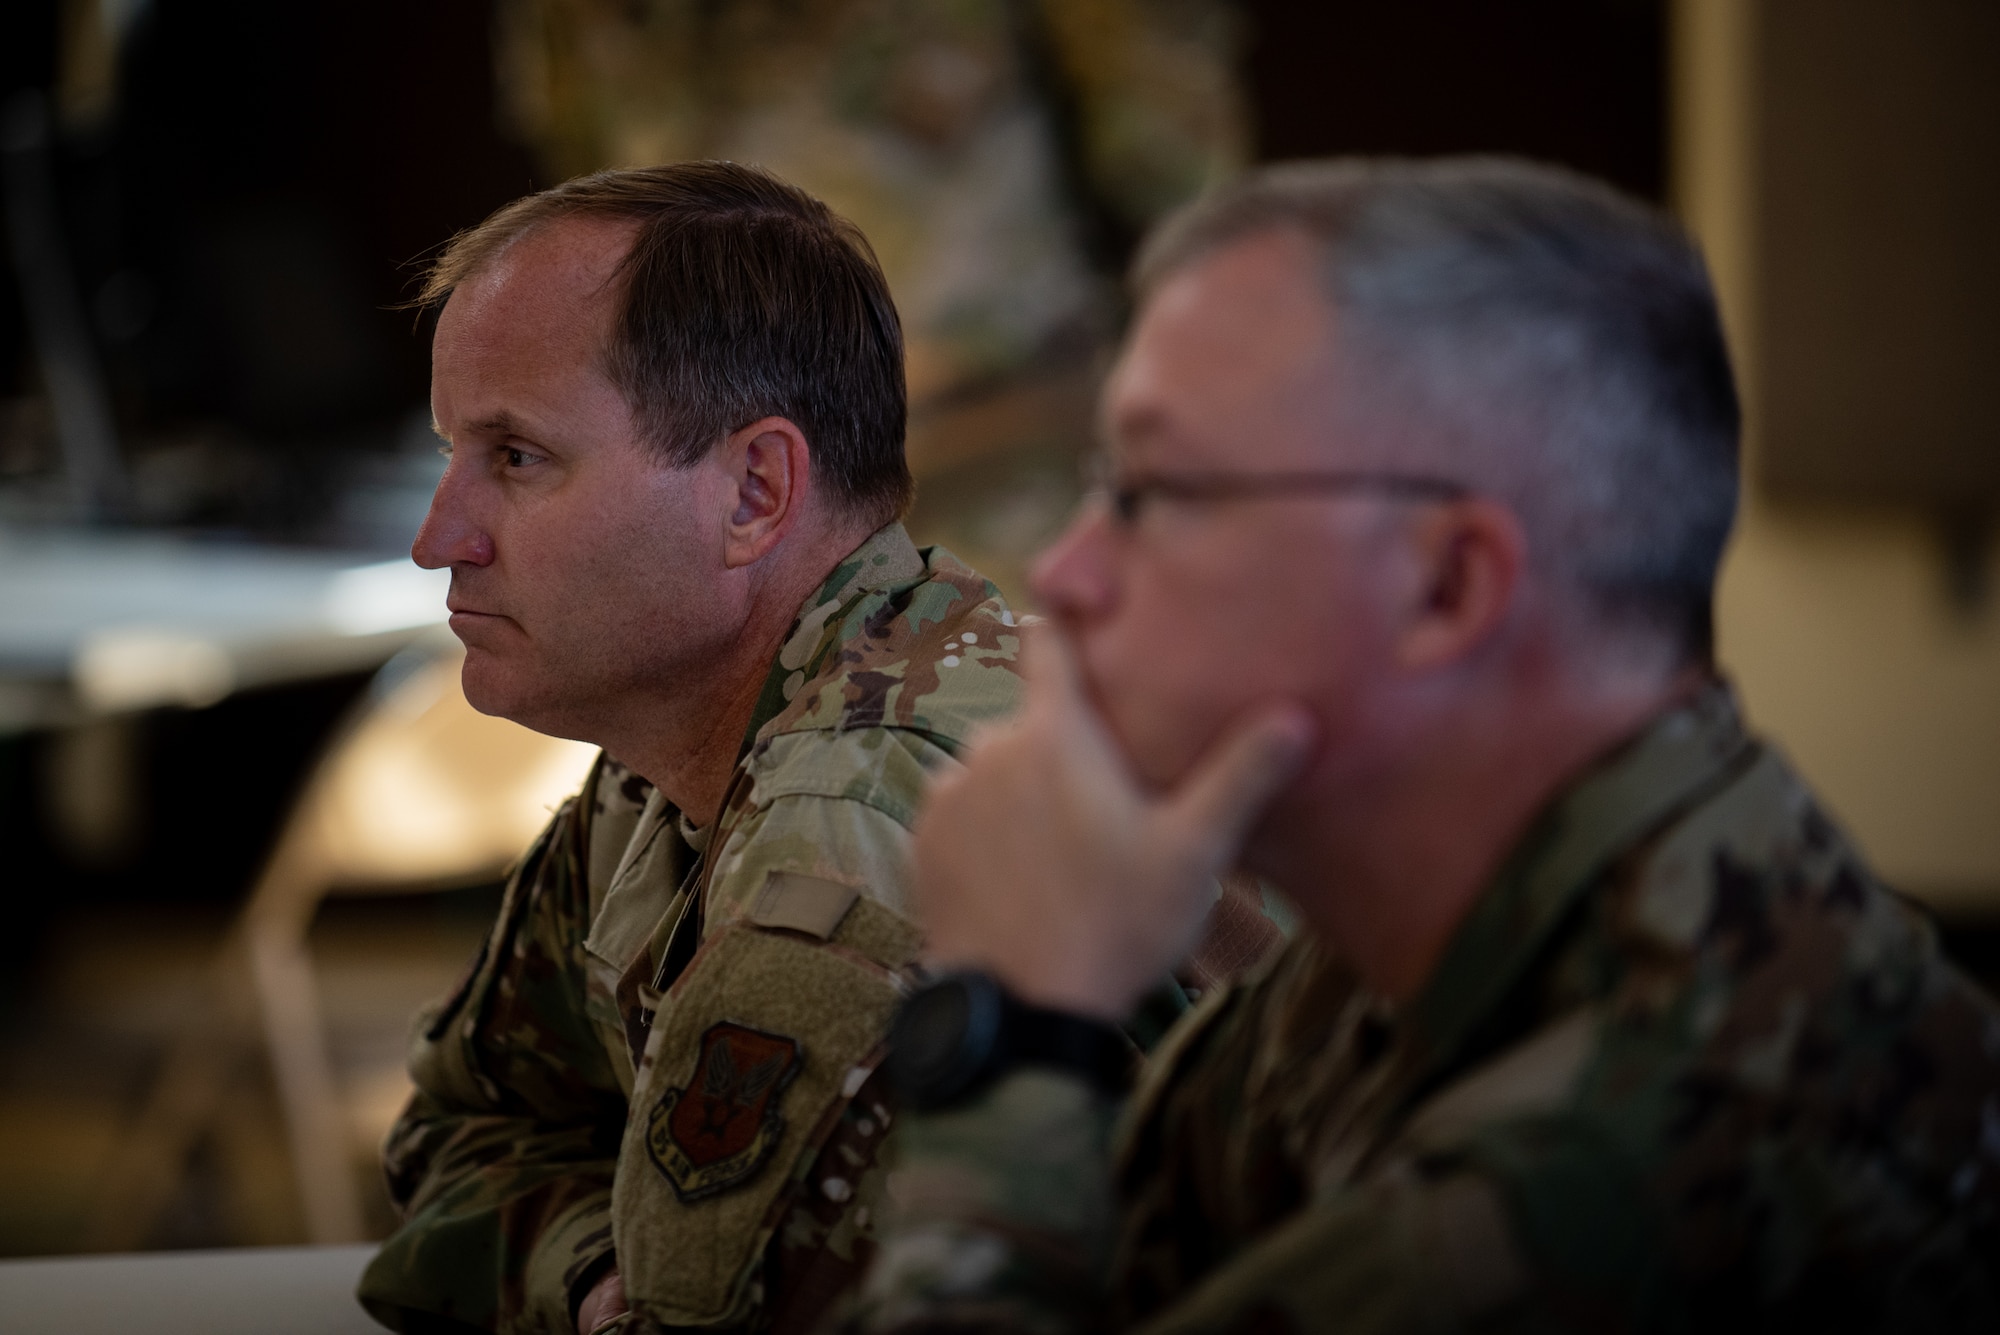 Air Force Maj. Gen. Cameron Holt, back, Deputy Secretary for Contracting, Office of the Assistant Secretary of the Air Force for Acquisition, Technology and Logistics, and Chief Master Sgt. Dennis Carr, Contracting Career Field Manager and Chief of Enlisted Policy, receive a brief at Fort Bragg, North Carolina, June 24, 2021. The brief was part of Joint Forces Contracting Exercise 2021.